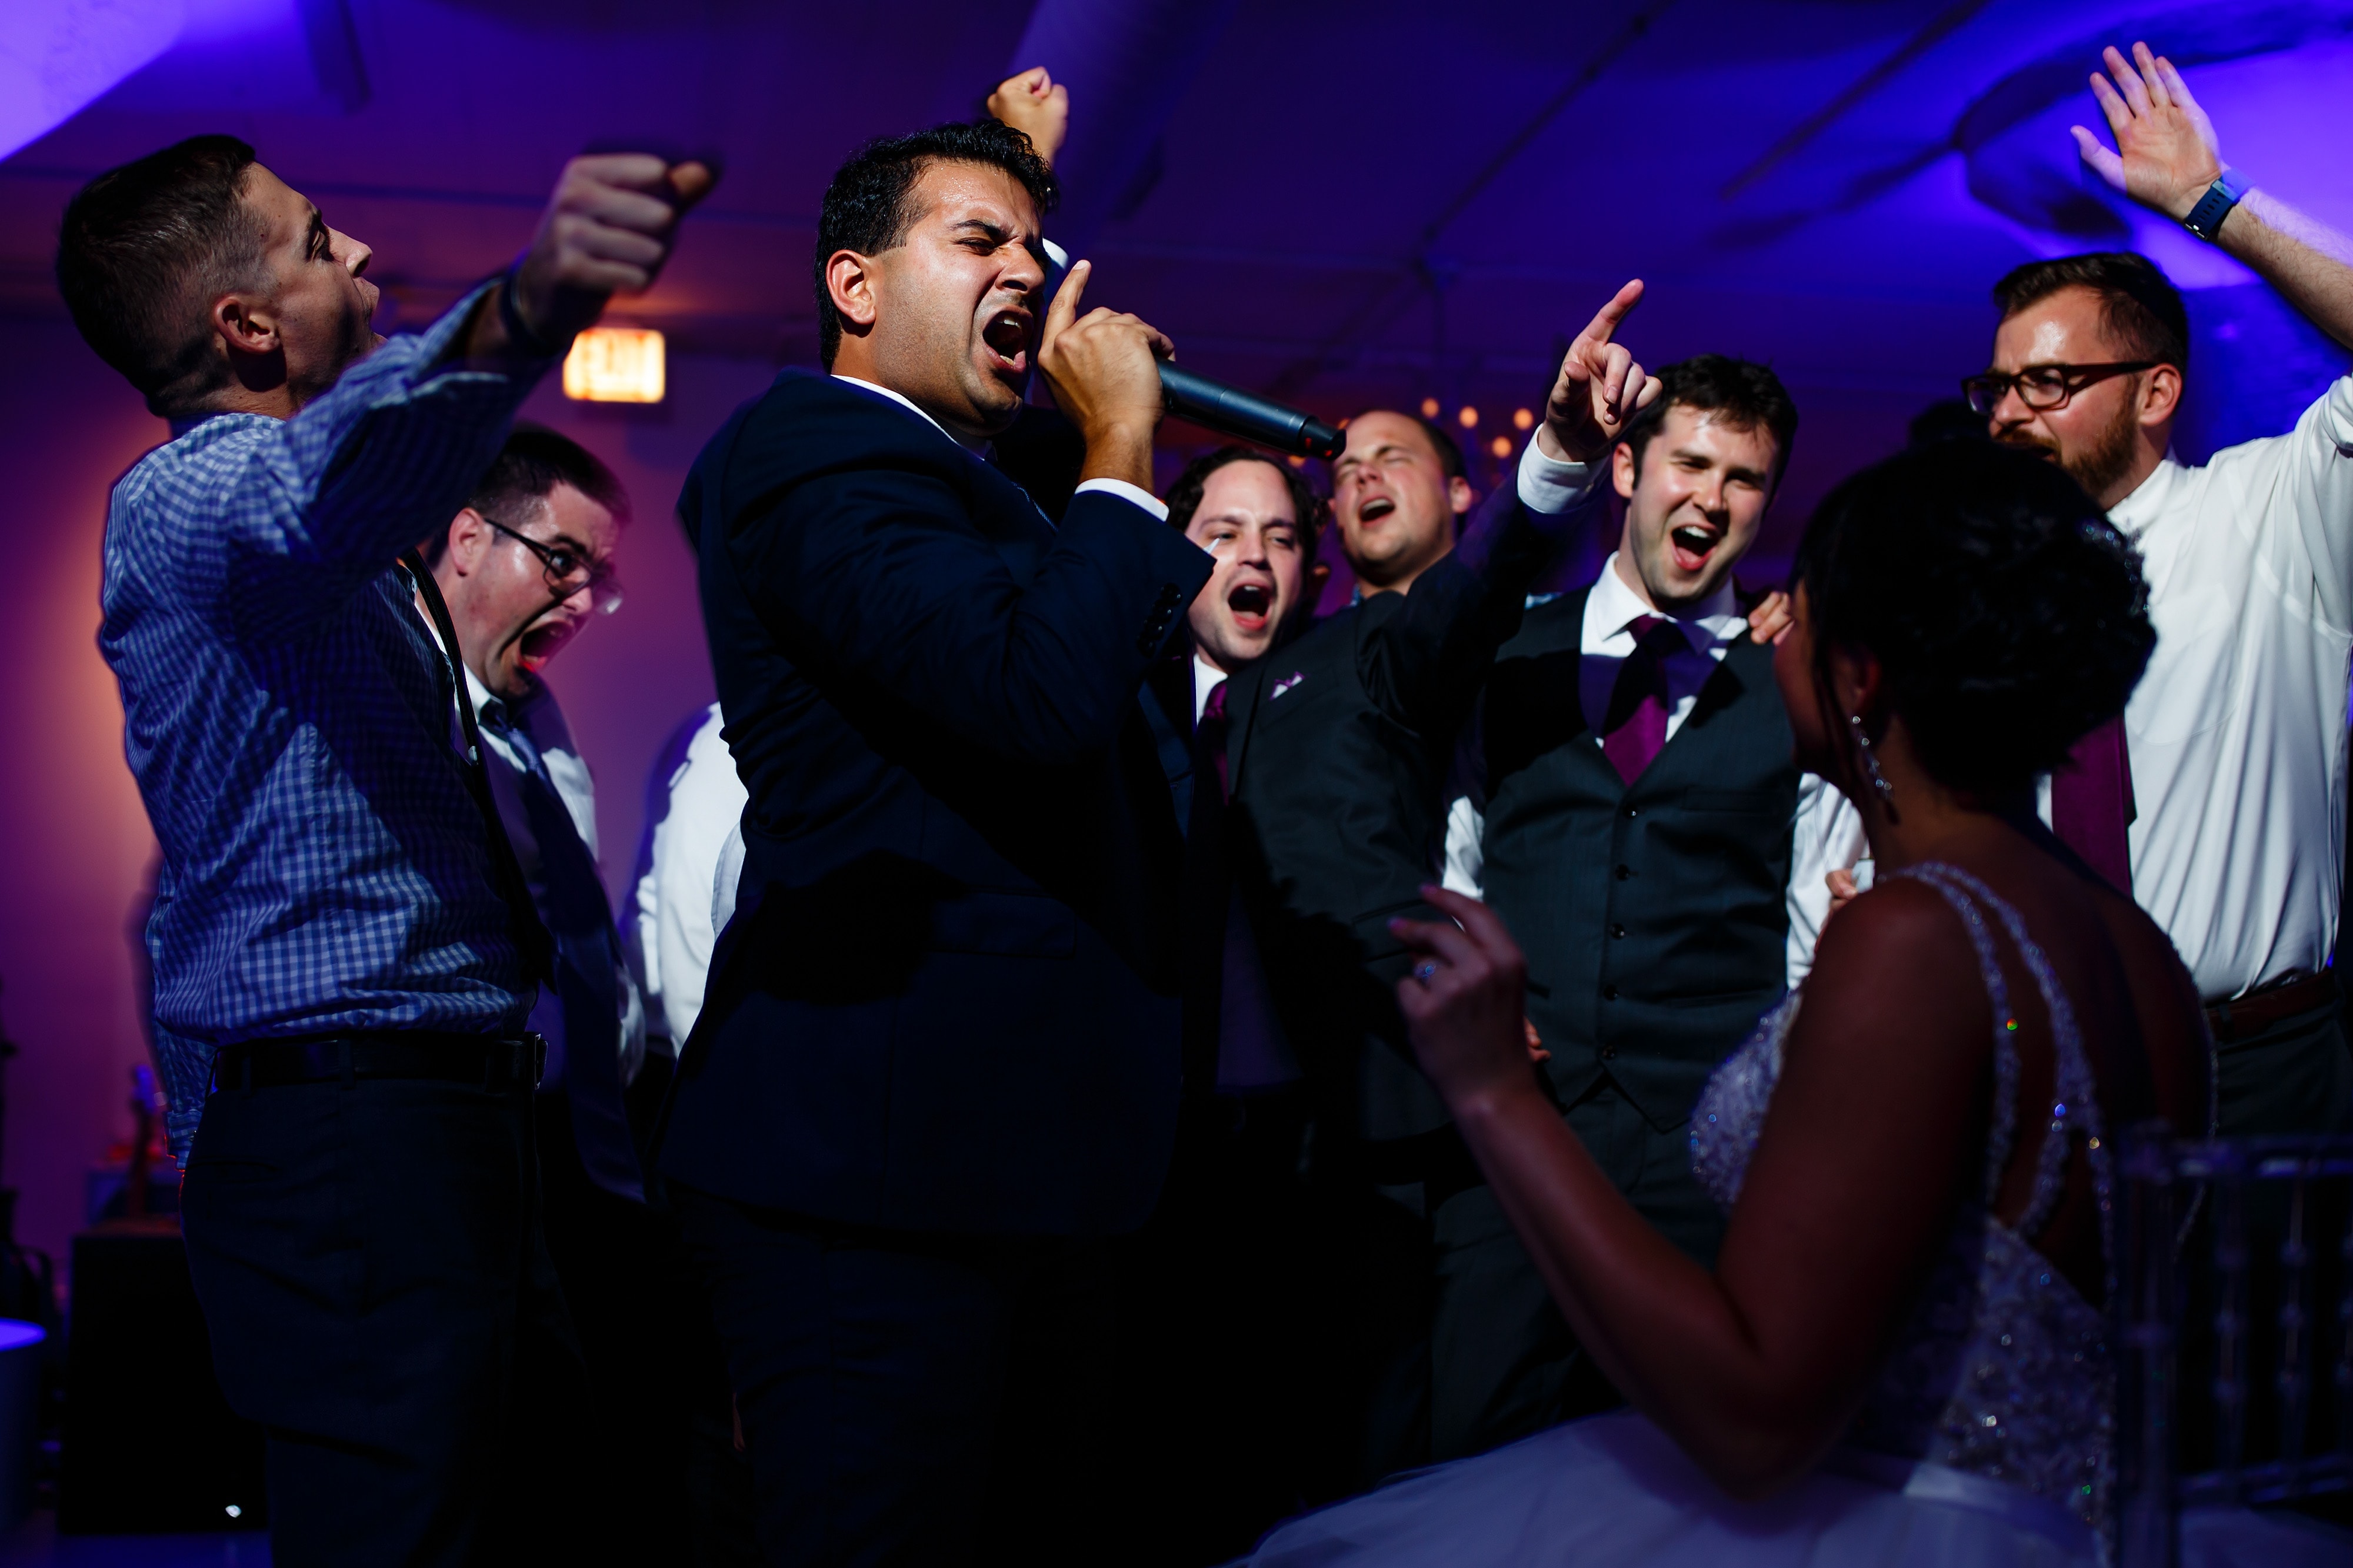 Guests dance during a wedding at Room 1520